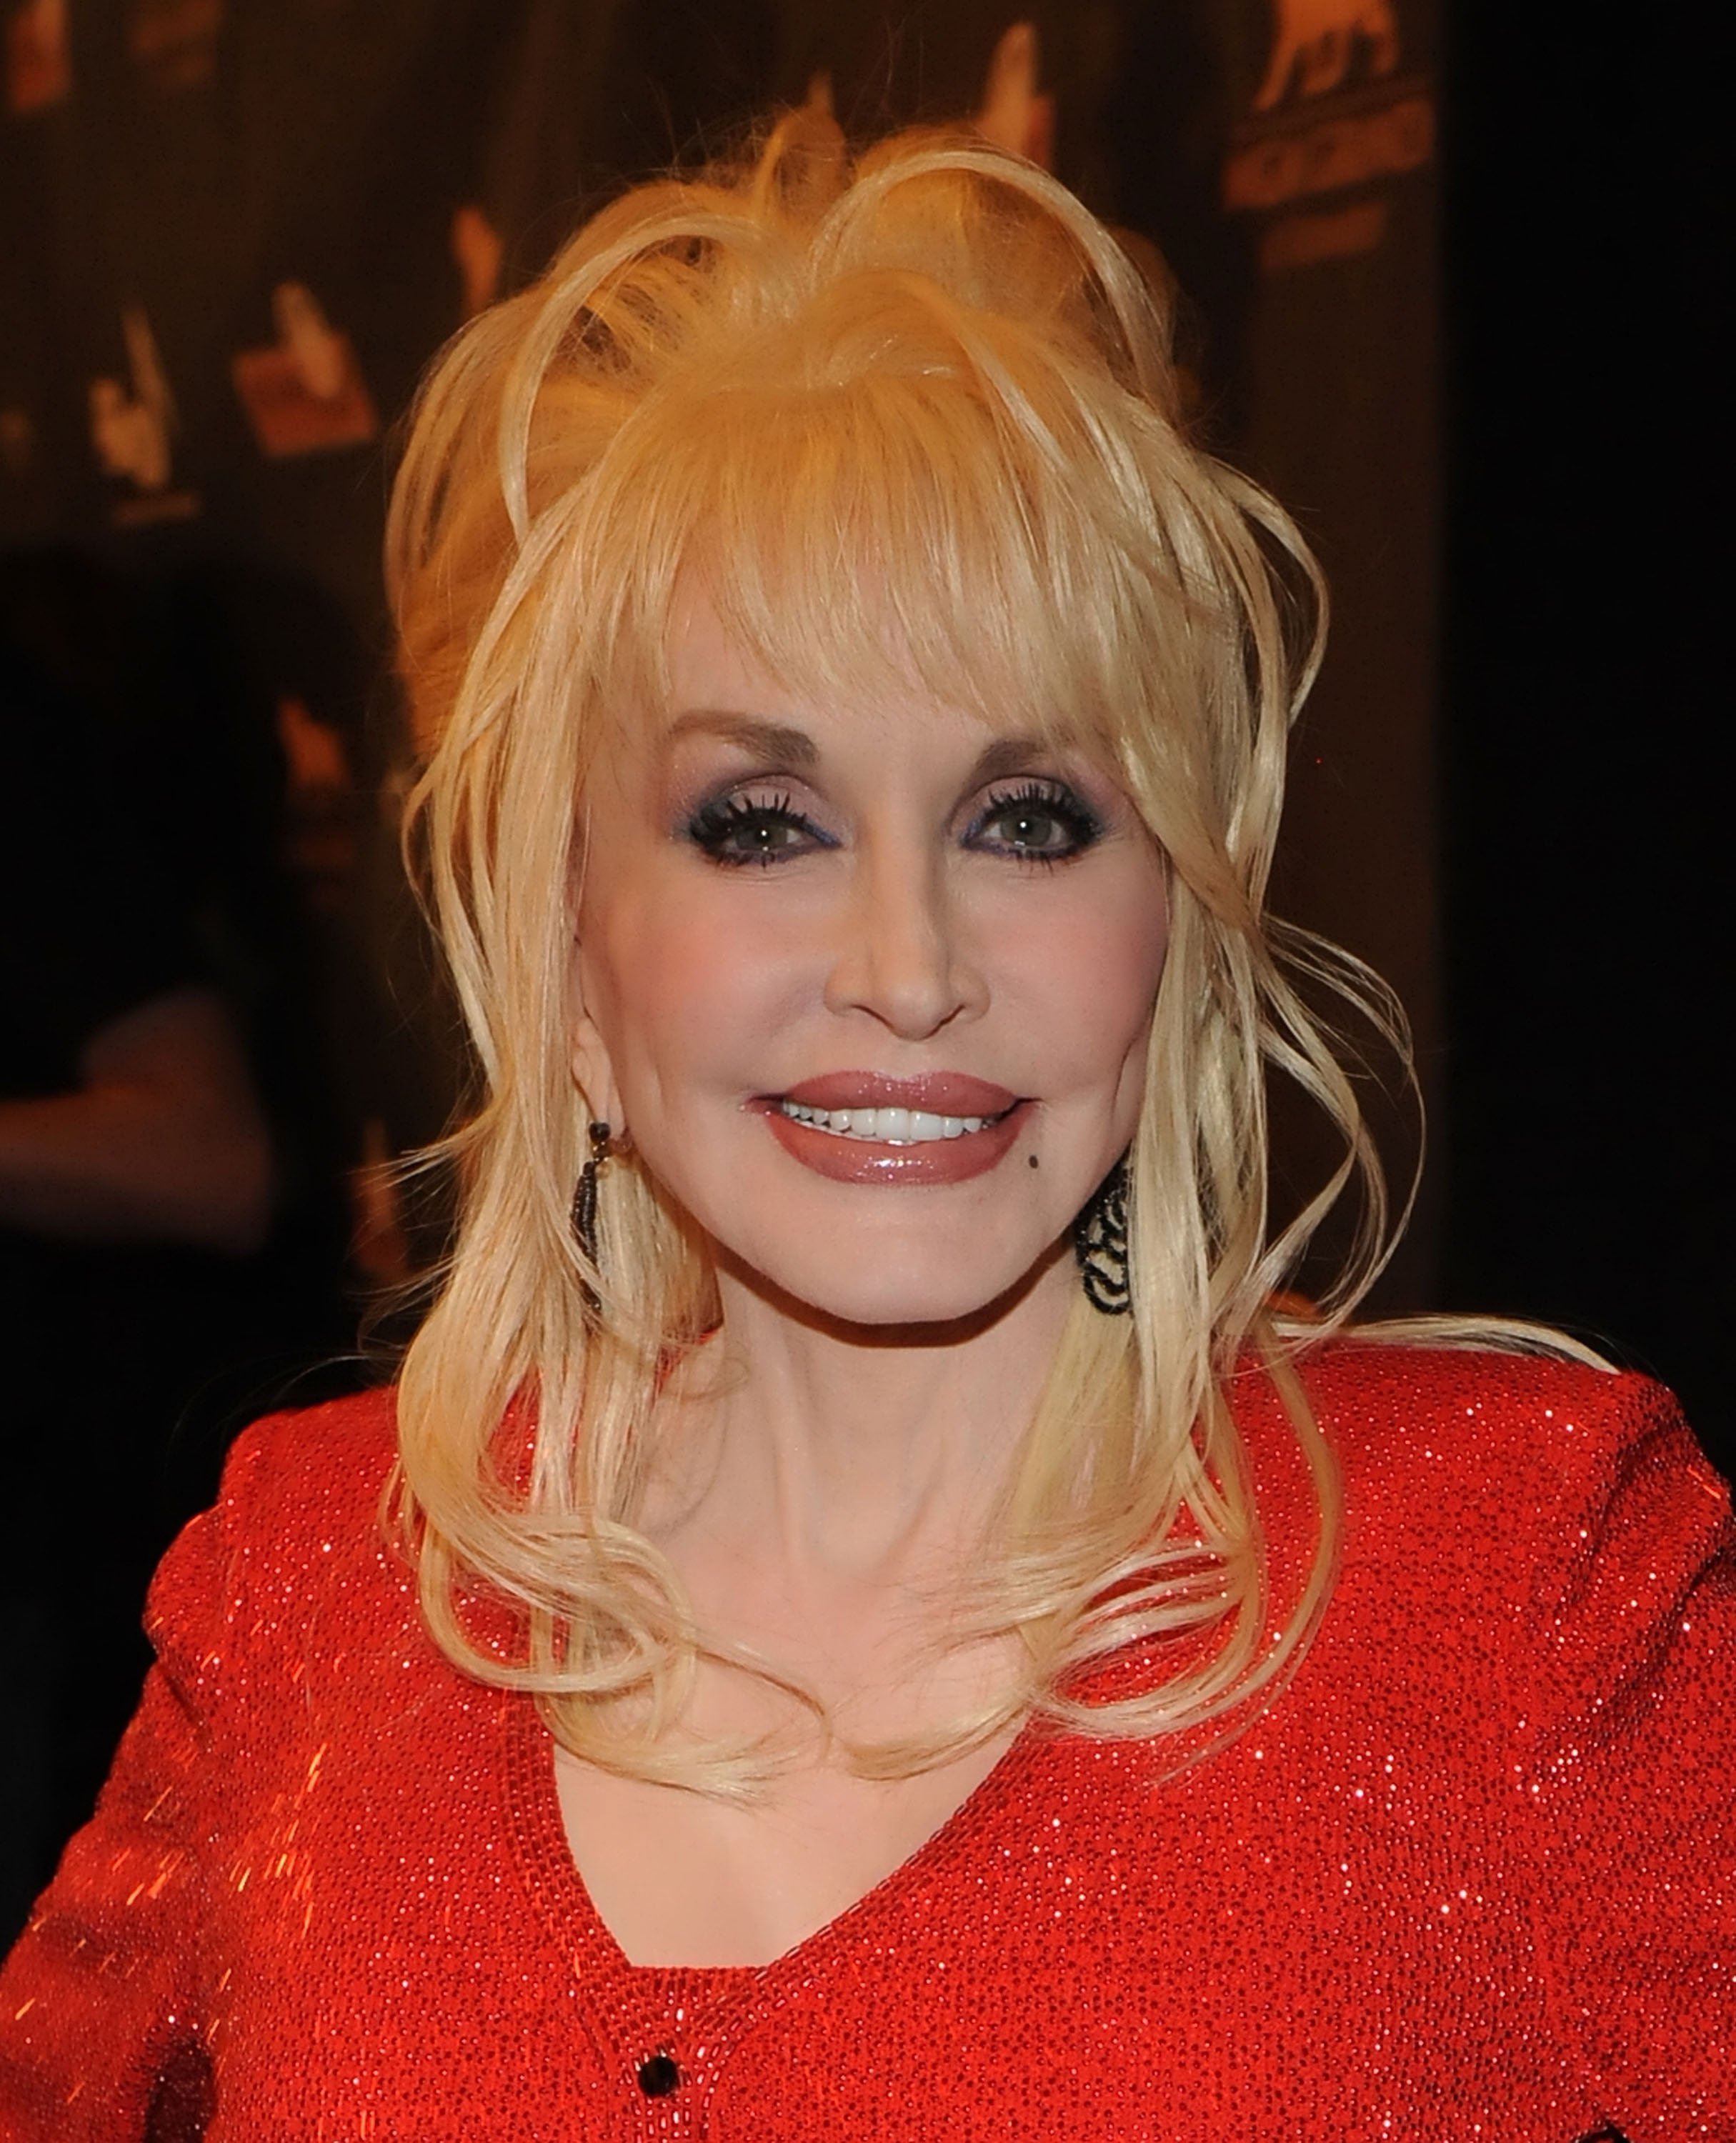 Dolly Parton attending an awards show in 2010. | Photo: Getty Images